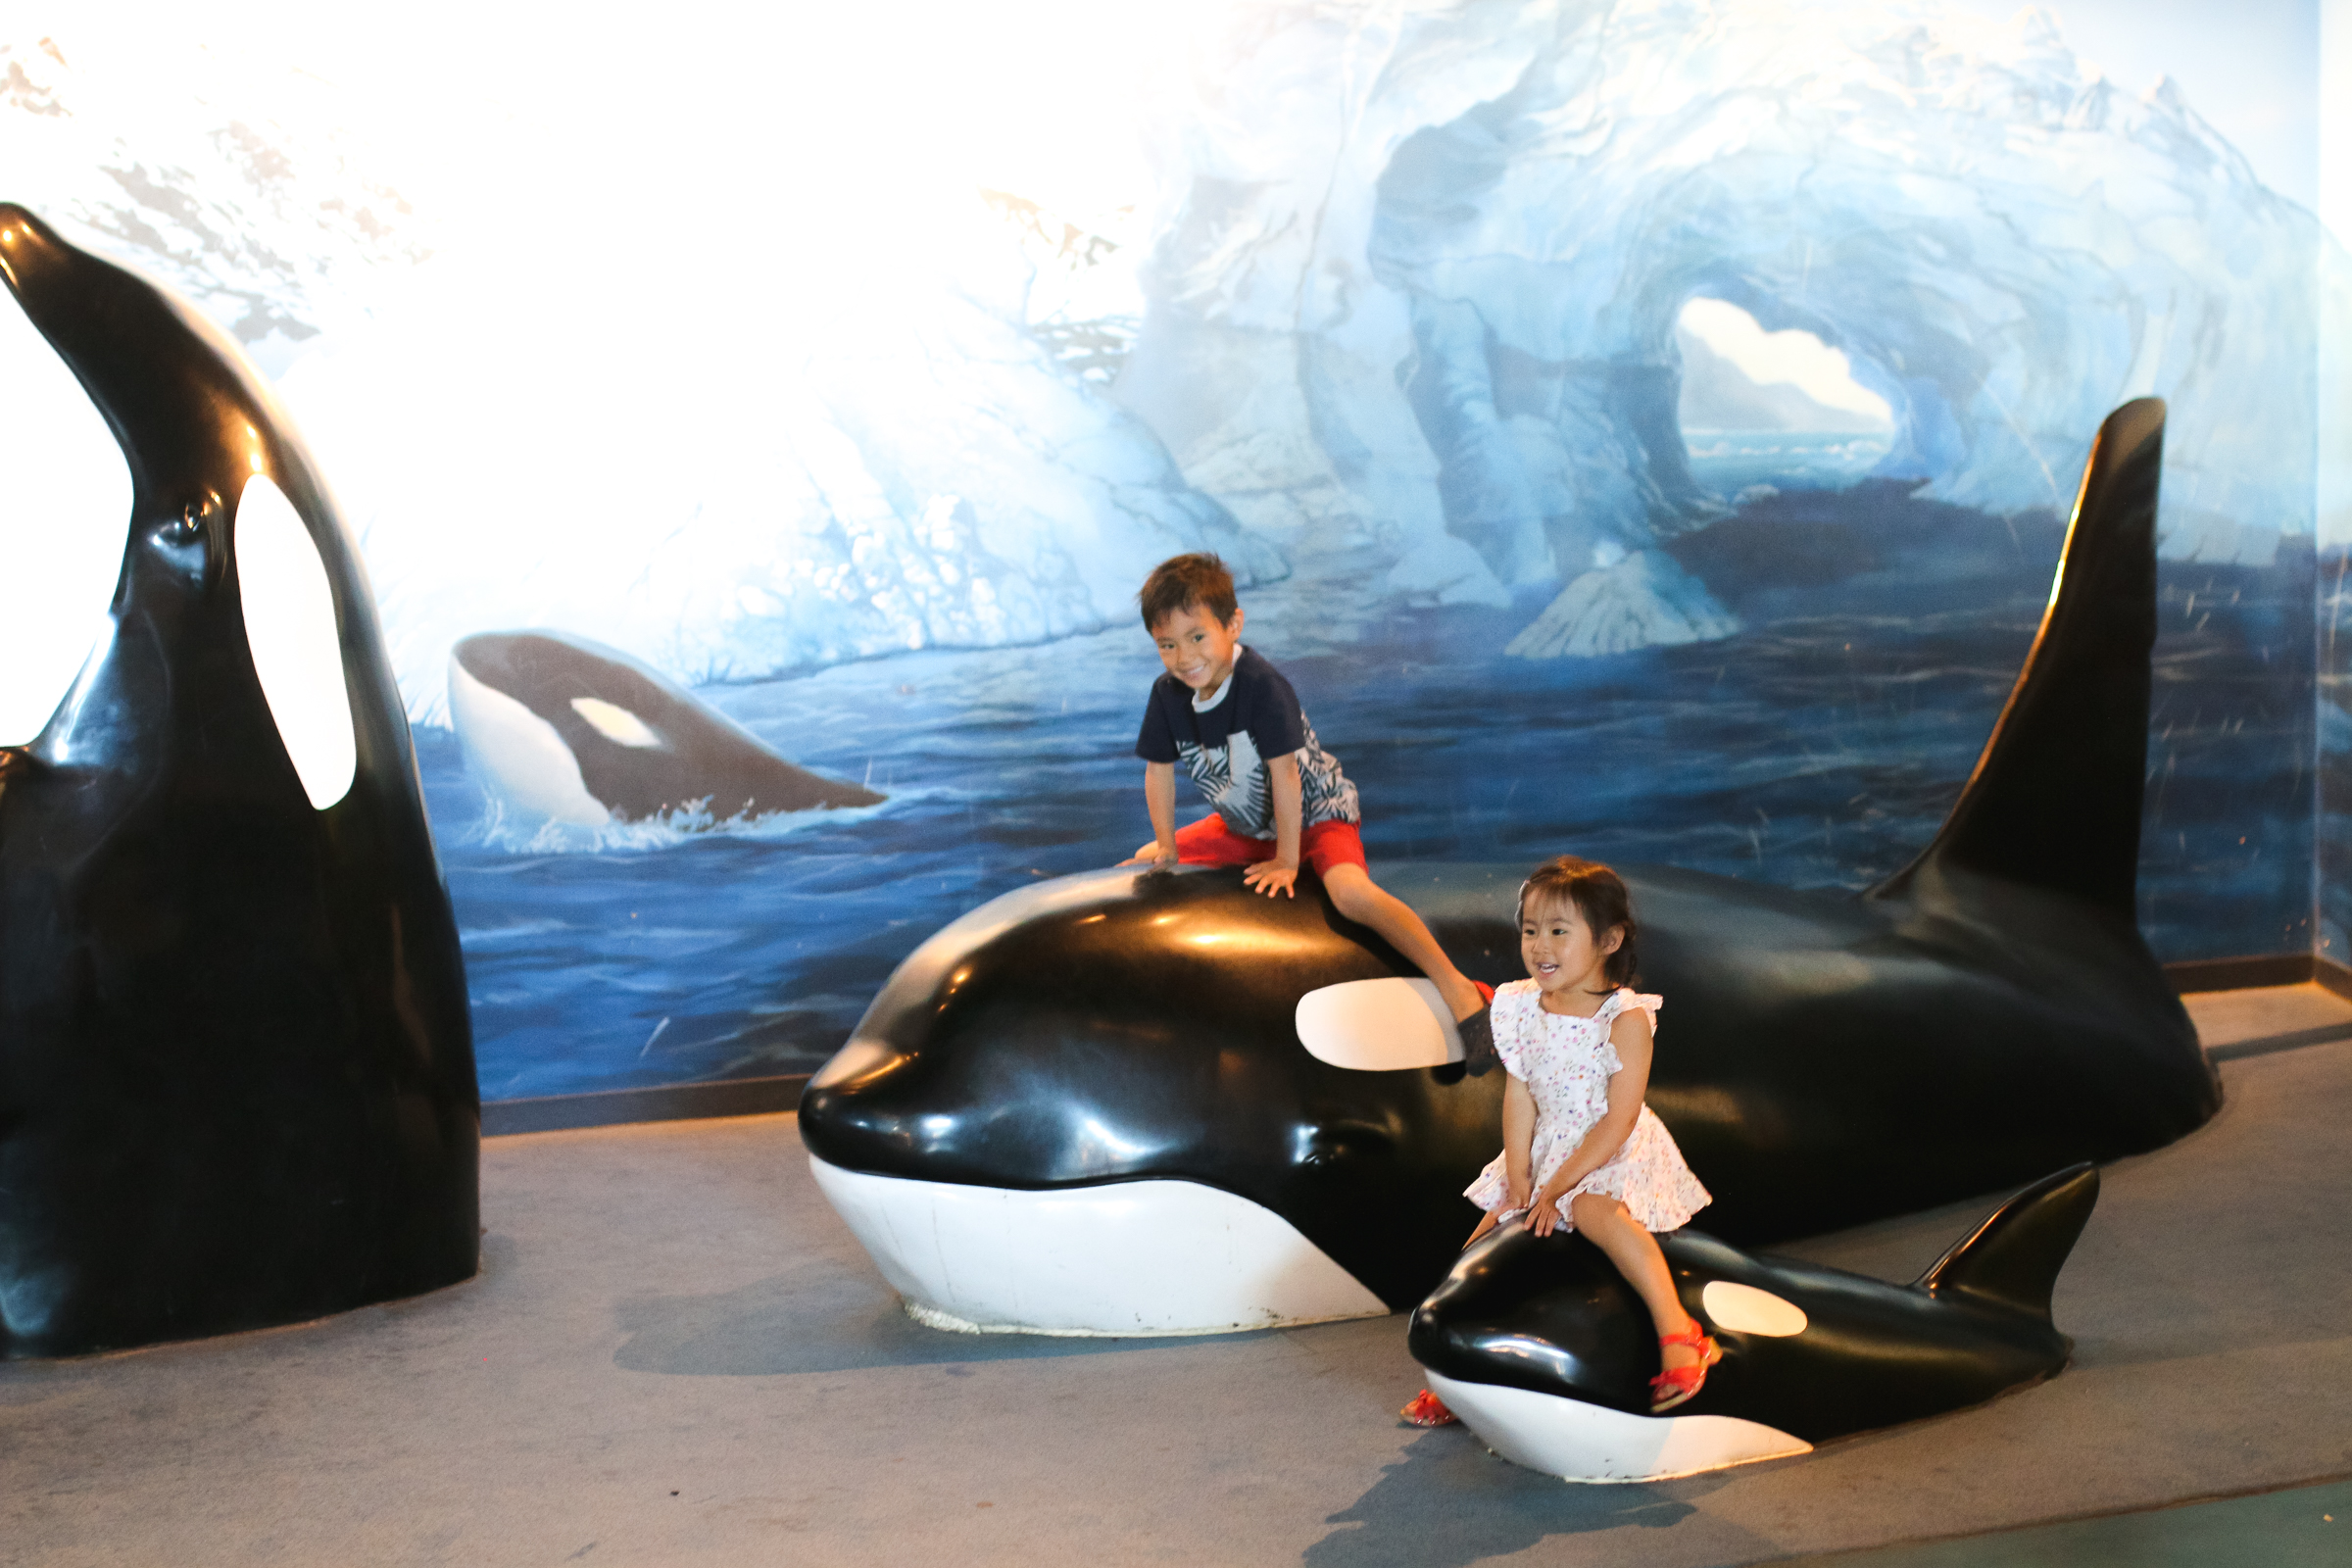 3 Tips to Visit the Loveland Living Planet Aquarium With Your Family by popular blogger Sandy A La Mode